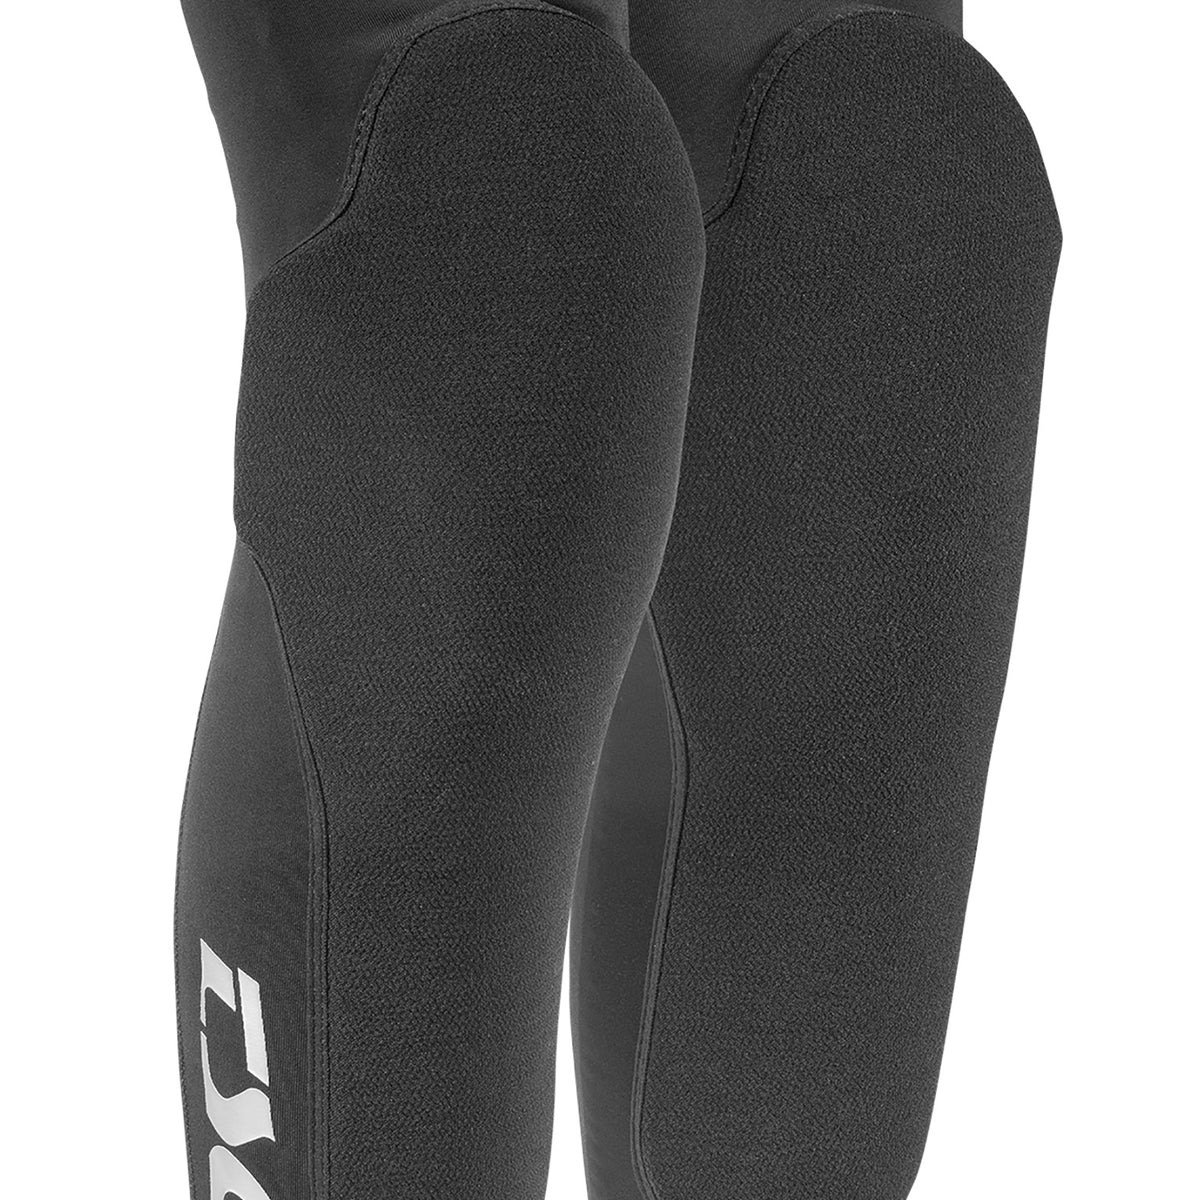 Dermis Pro A Youth Knee-Sleeve TSG Knee- and Shinguards in black